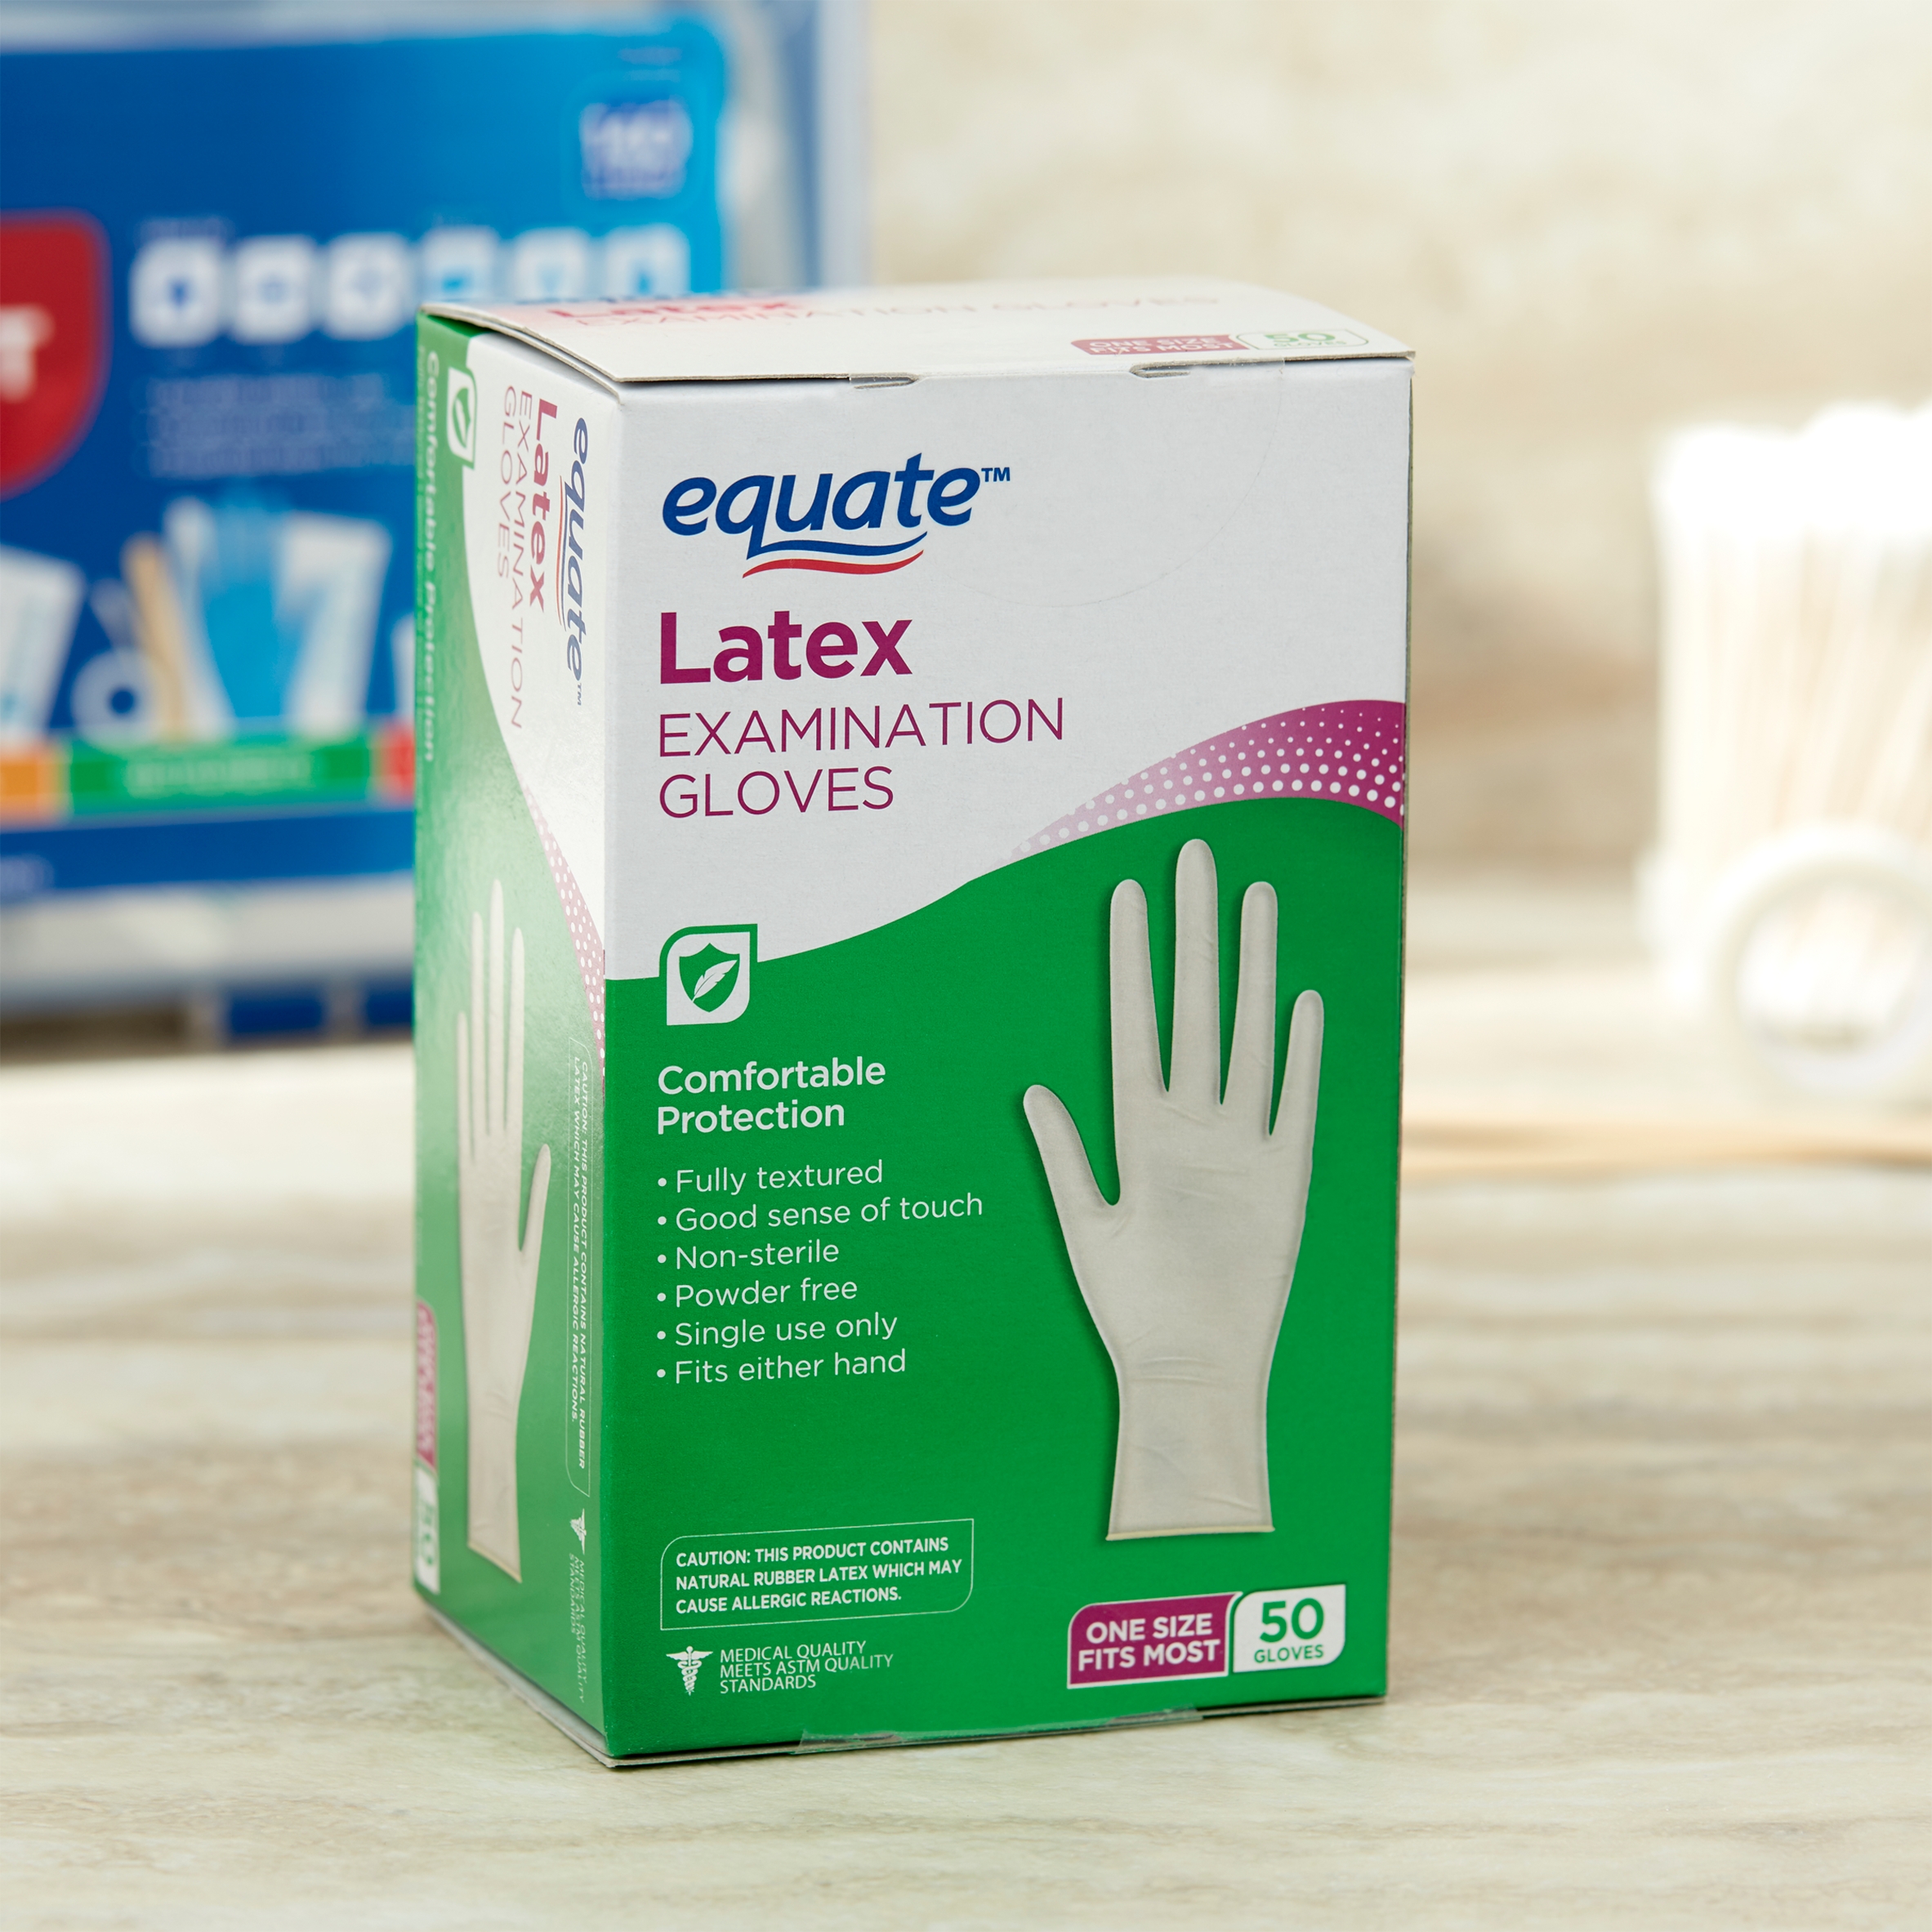 Equate Latex Examination Gloves, 50 Count - image 2 of 10